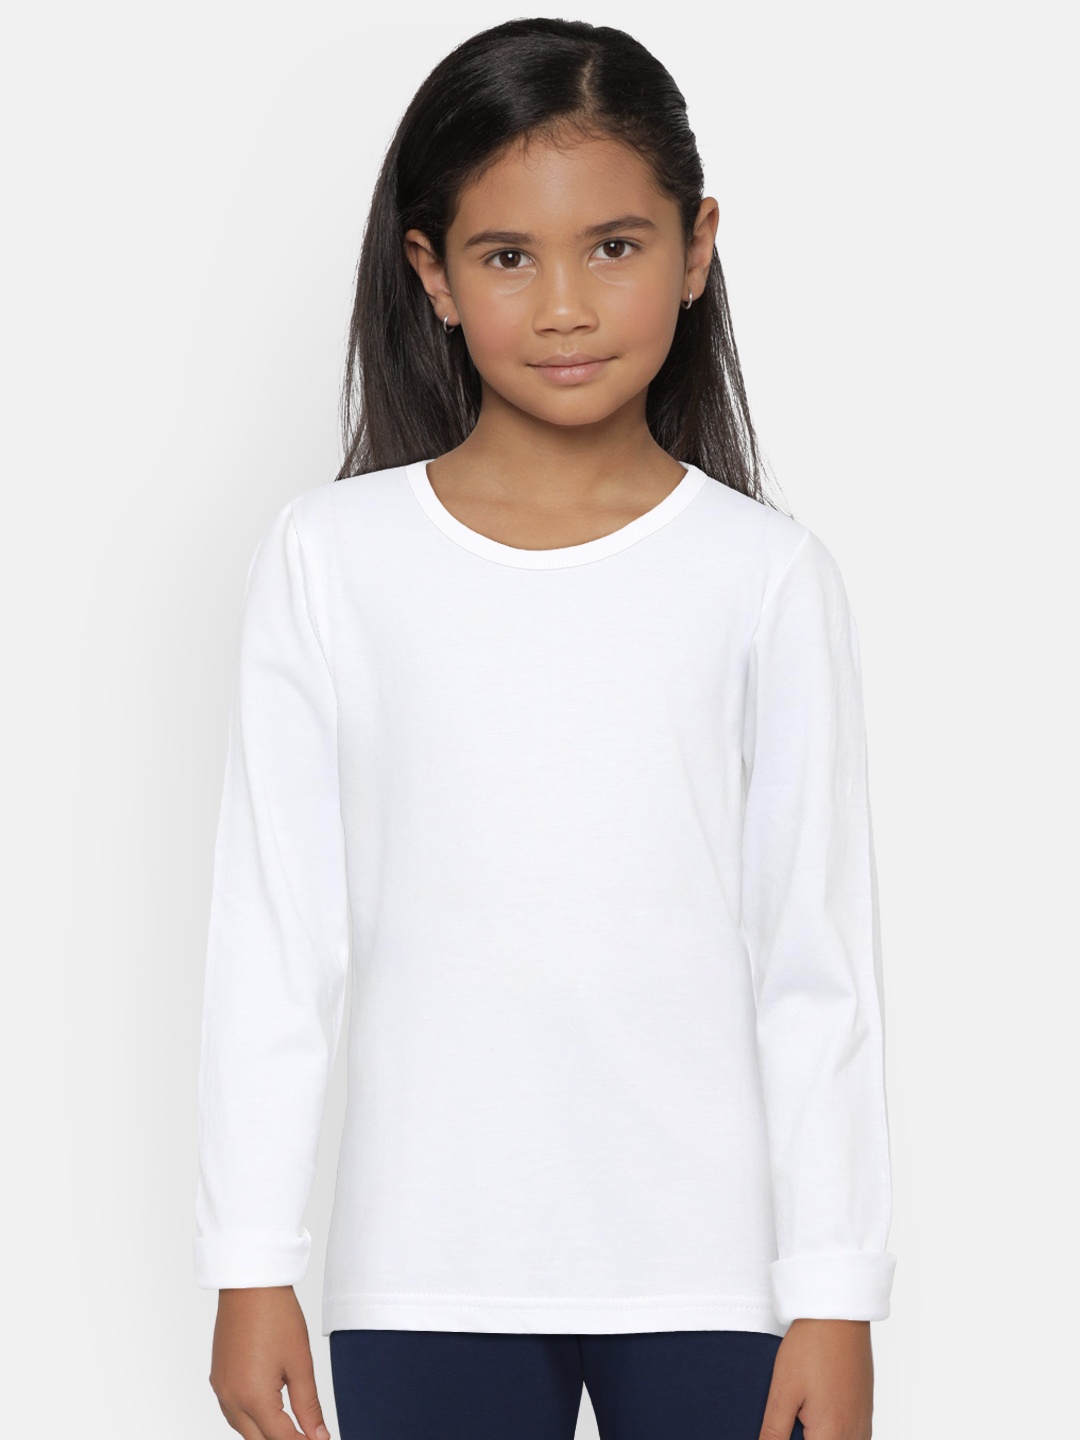 SINI MINI Girls White Solid Round Neck T-shirt - buy at the price of $3 ...